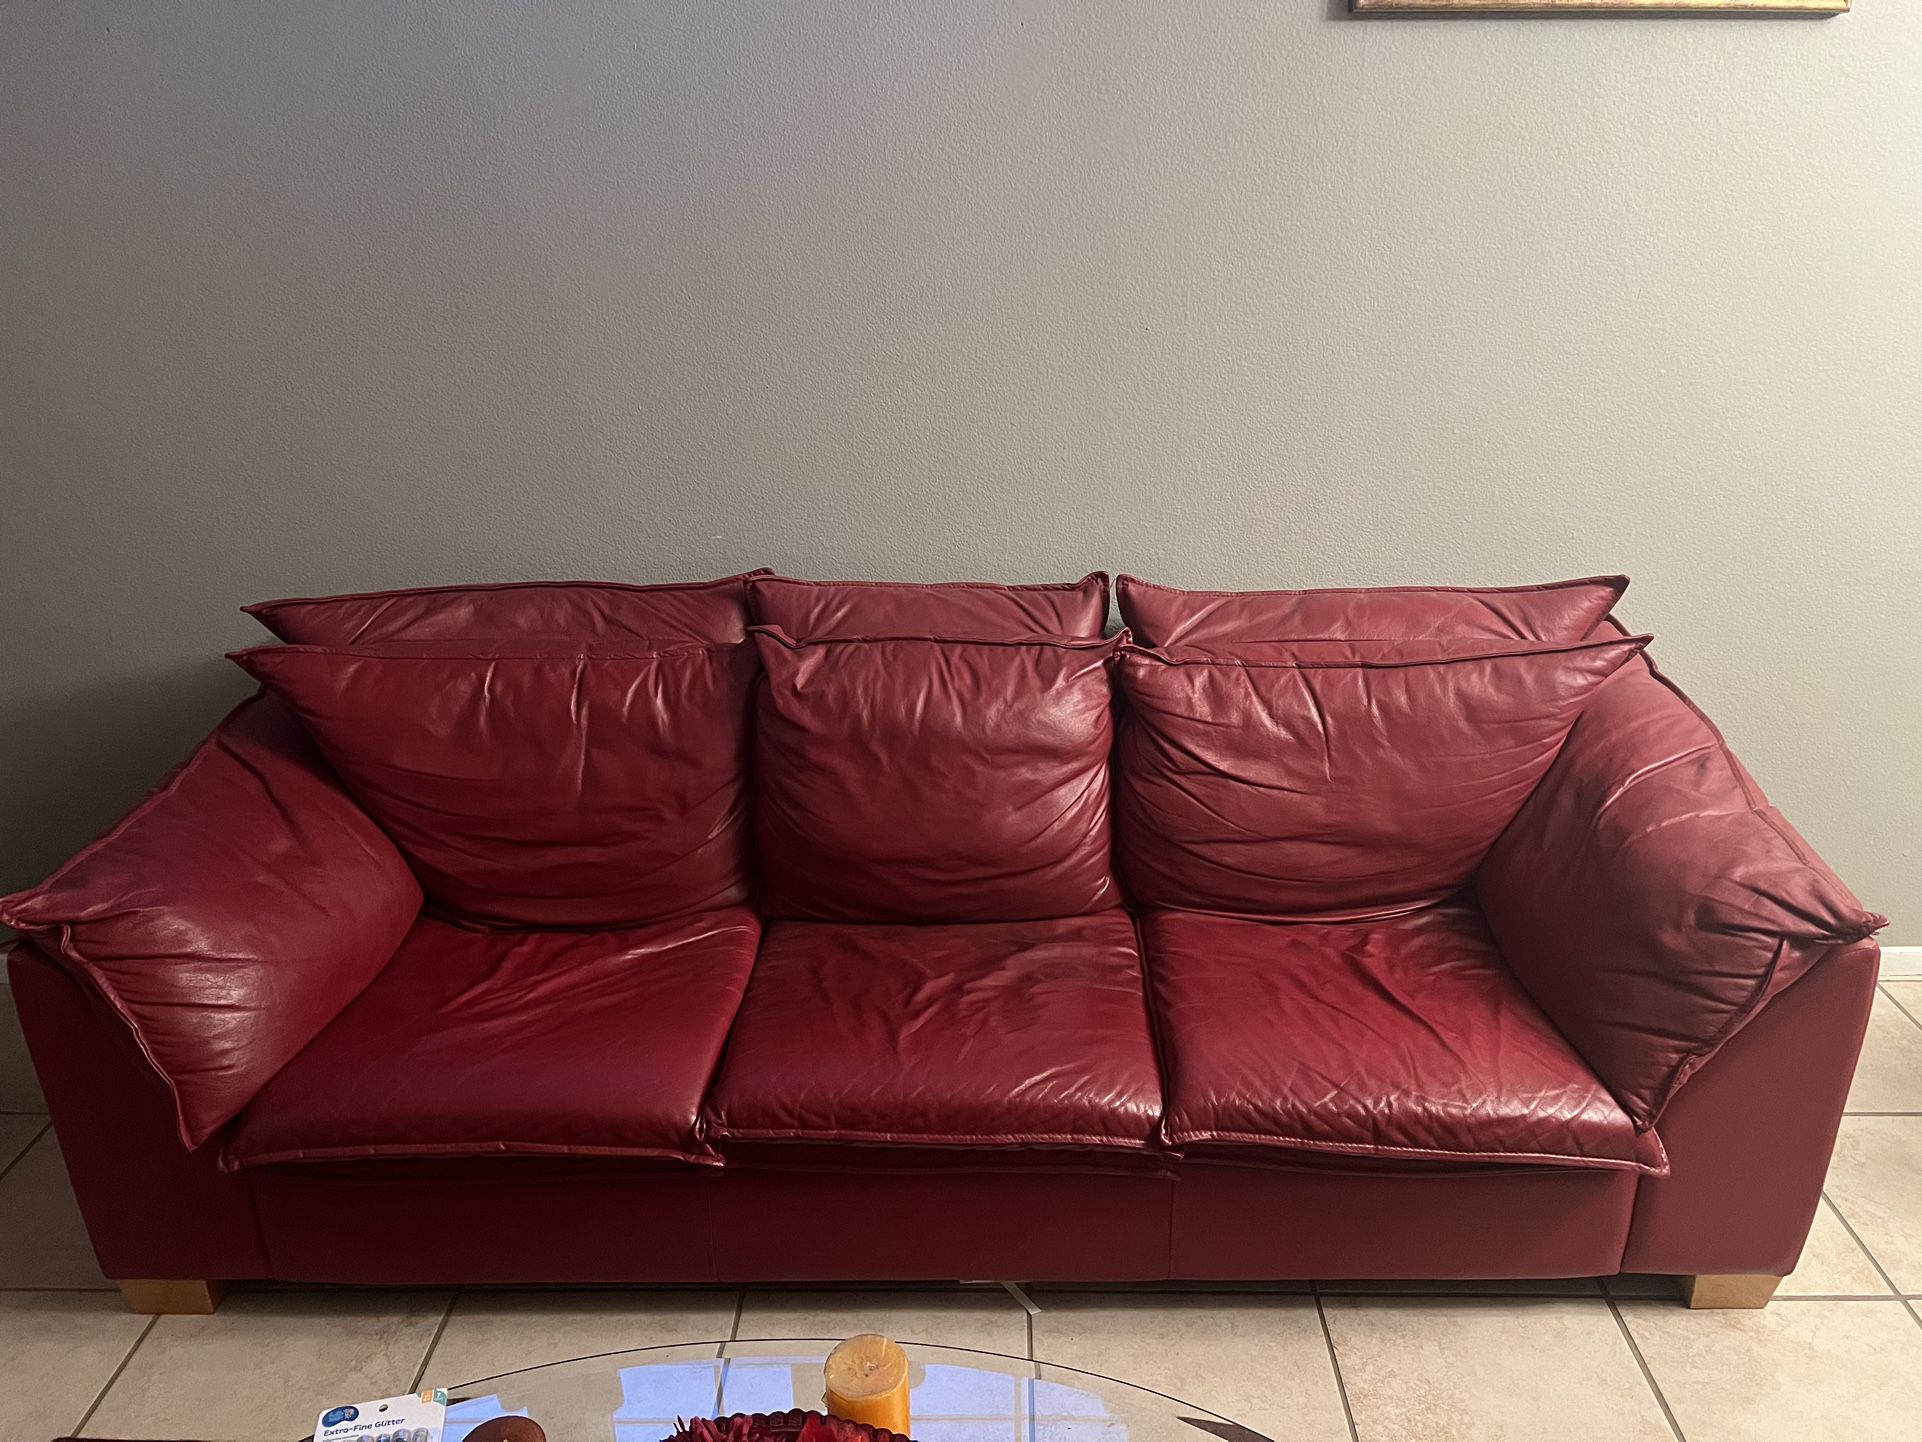 Red Leather Couches, Ottoman And Chair 